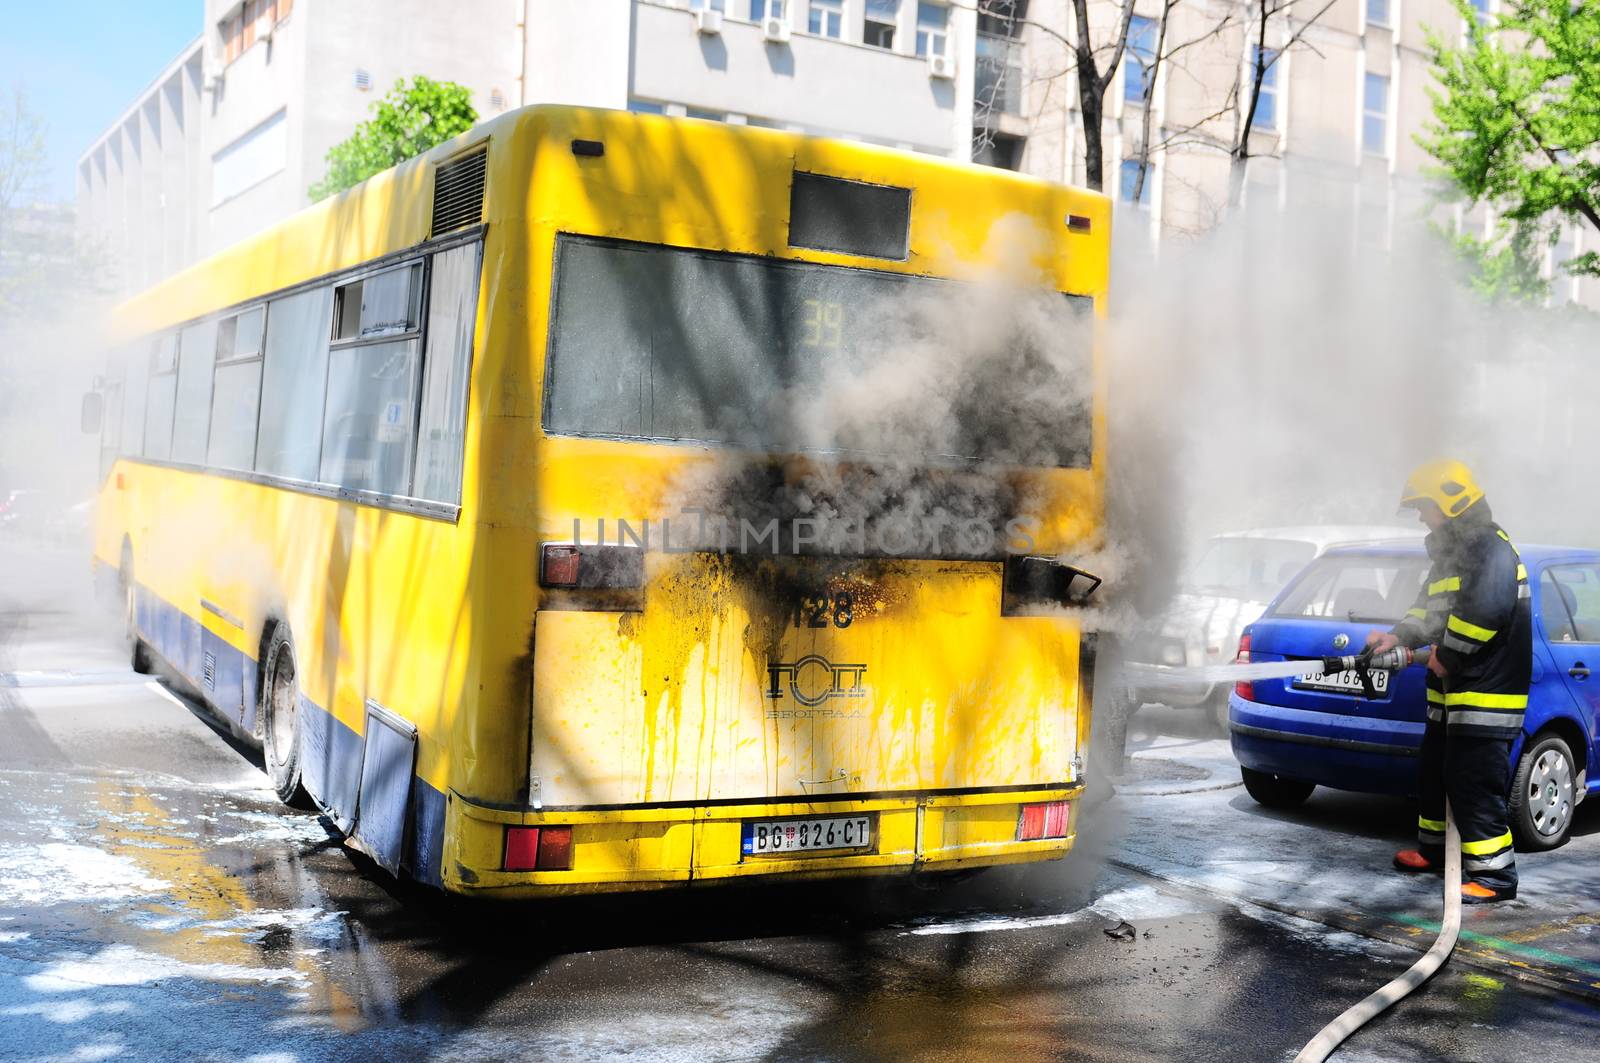 SERBIA, BELGRADE - APRIL 27, 2012: Bus on fire on the street in the middle of the day. More than have of the buses in Belgrade are older than 10 years